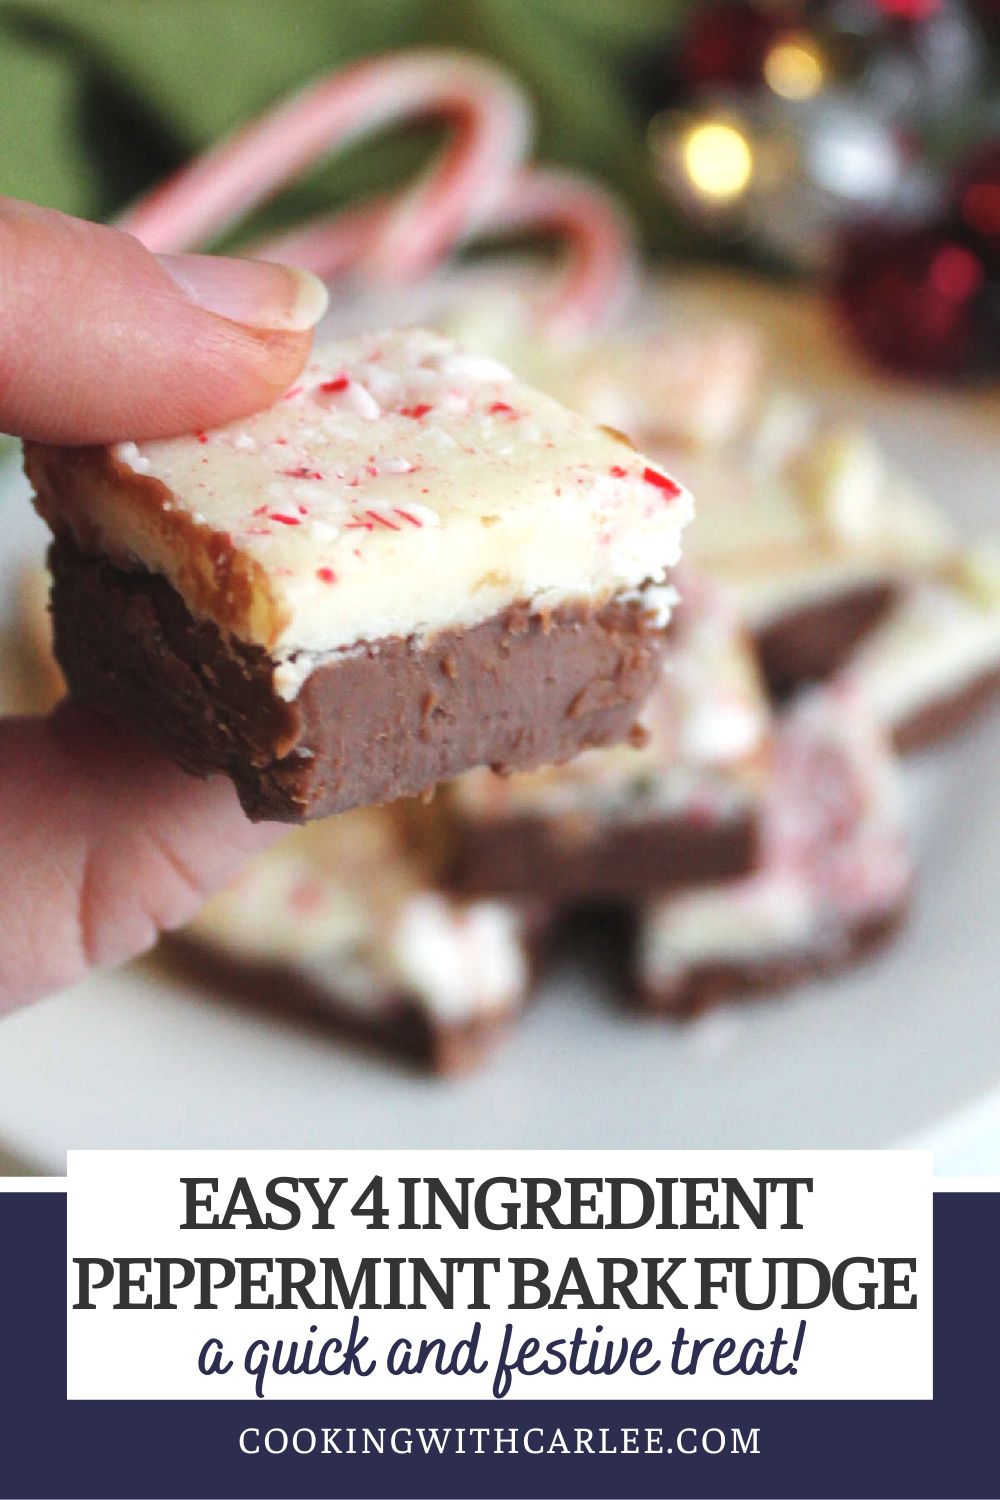 Peppermint bark fudge has a layer of chocolate fudge topped with white chocolate fudge and bits of candy cane. You would think this would be complicated, but it really is easy to do and only takes 4 simple ingredients. It is a perfect quick addition to you holiday treat making!